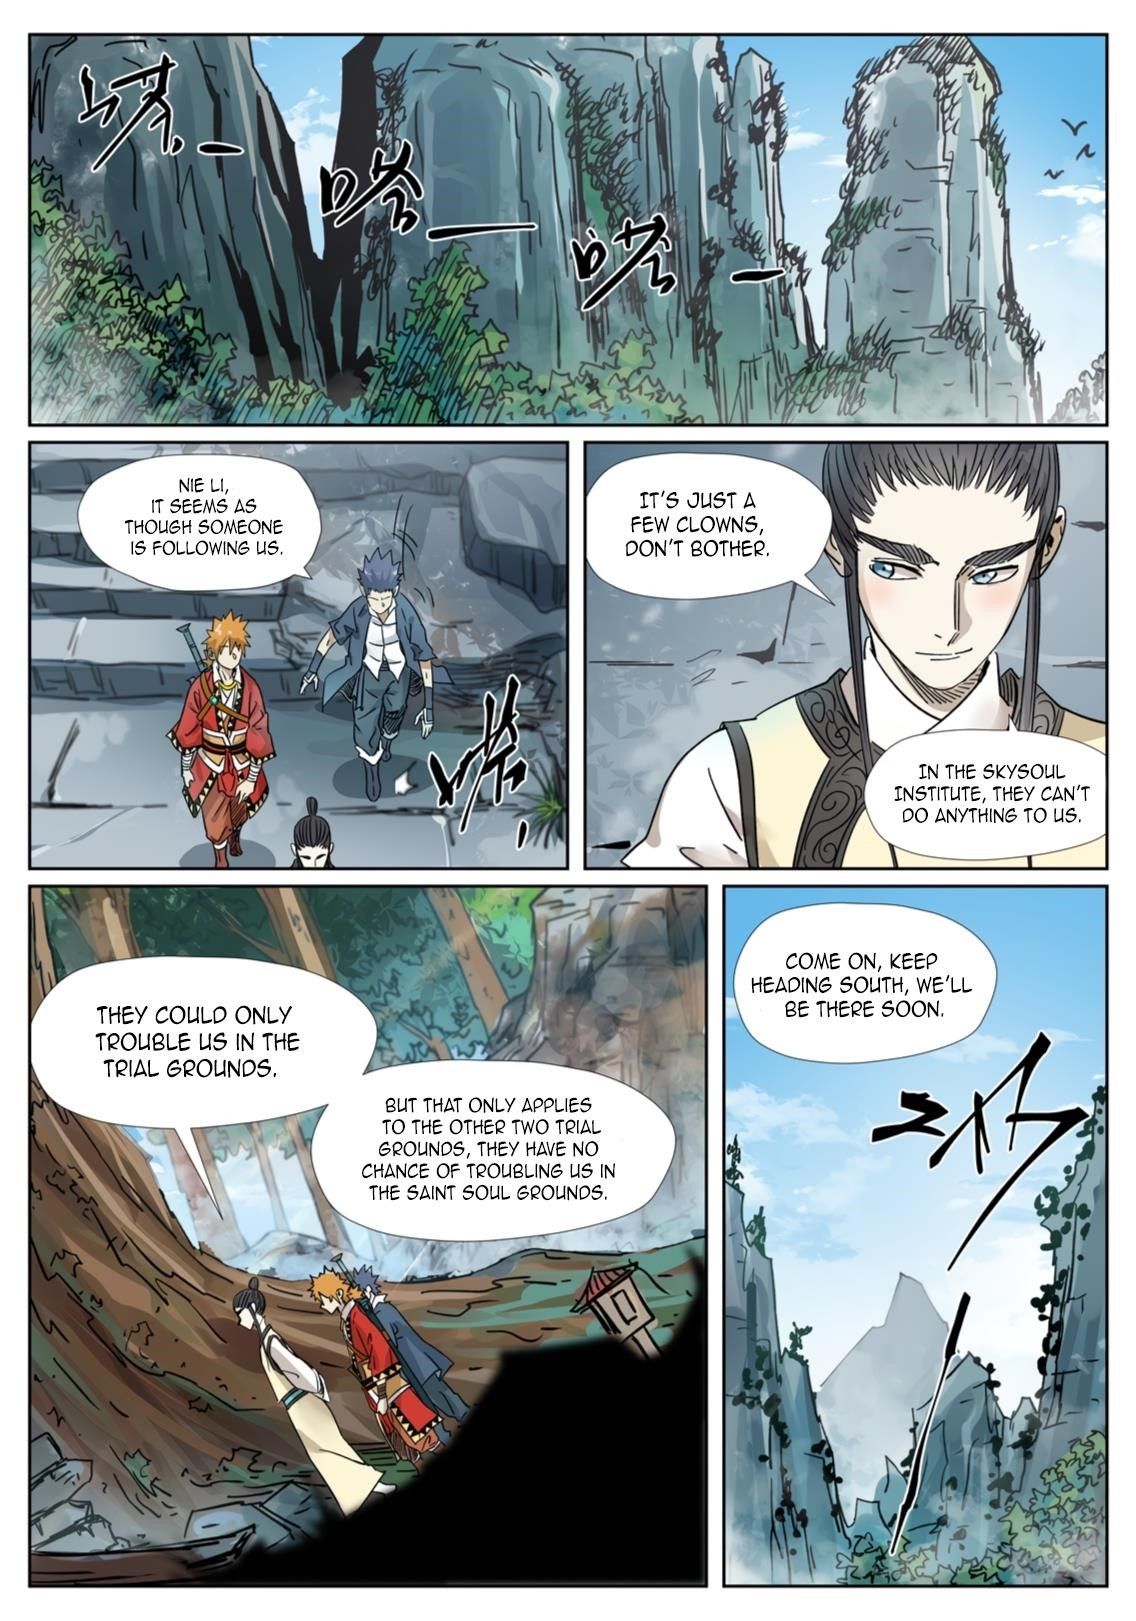 Tales of Demons and Gods chapter 310.1 page 2